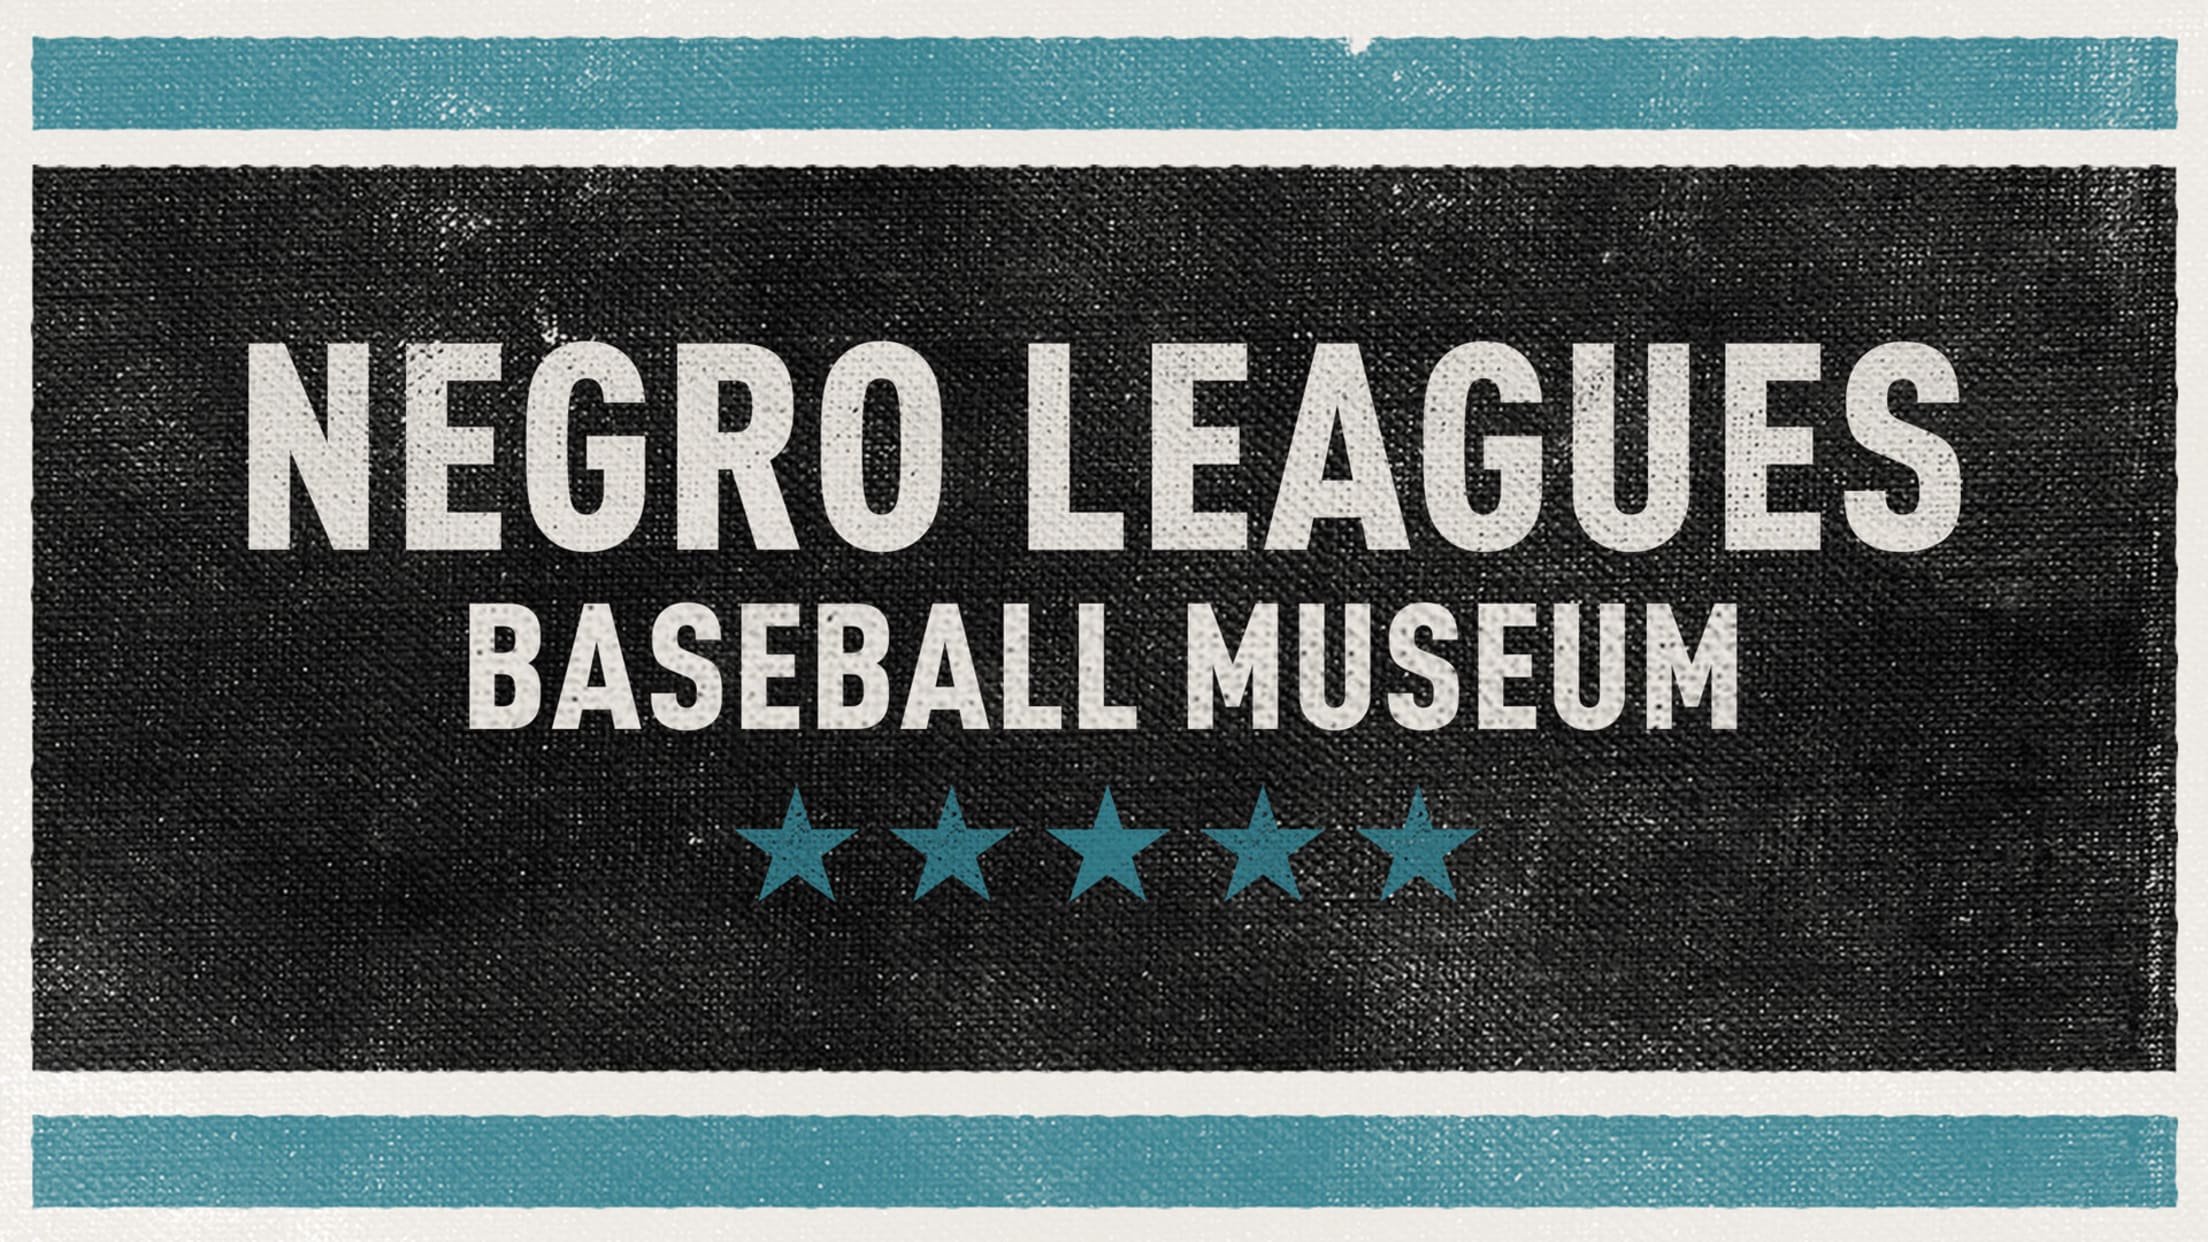 Salute to the Negro Leagues: A Juneteenth Celebration